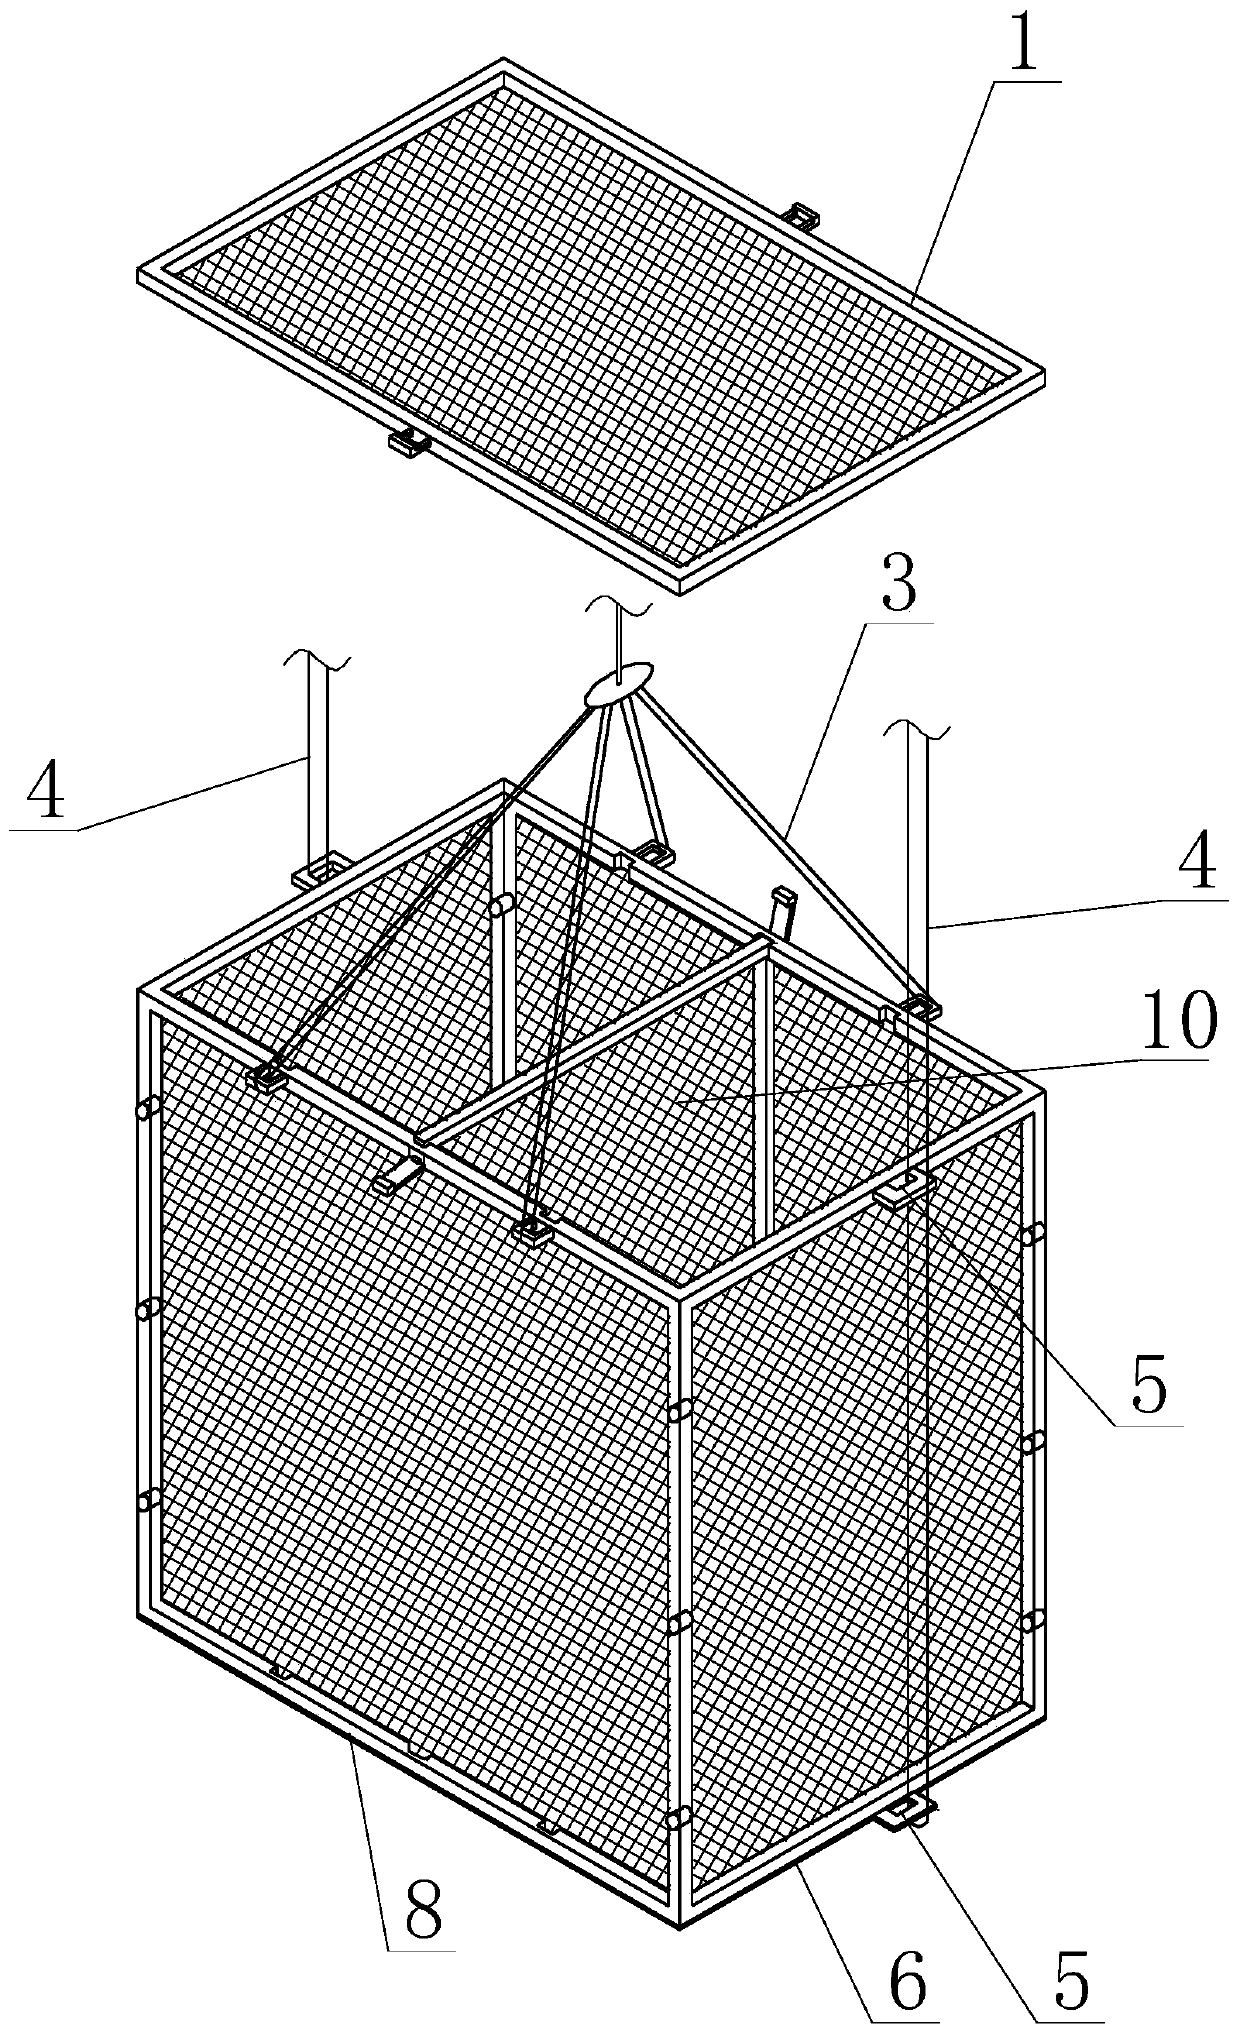 A collapsible device for multiplication and release of fish and sea treasures and its application method